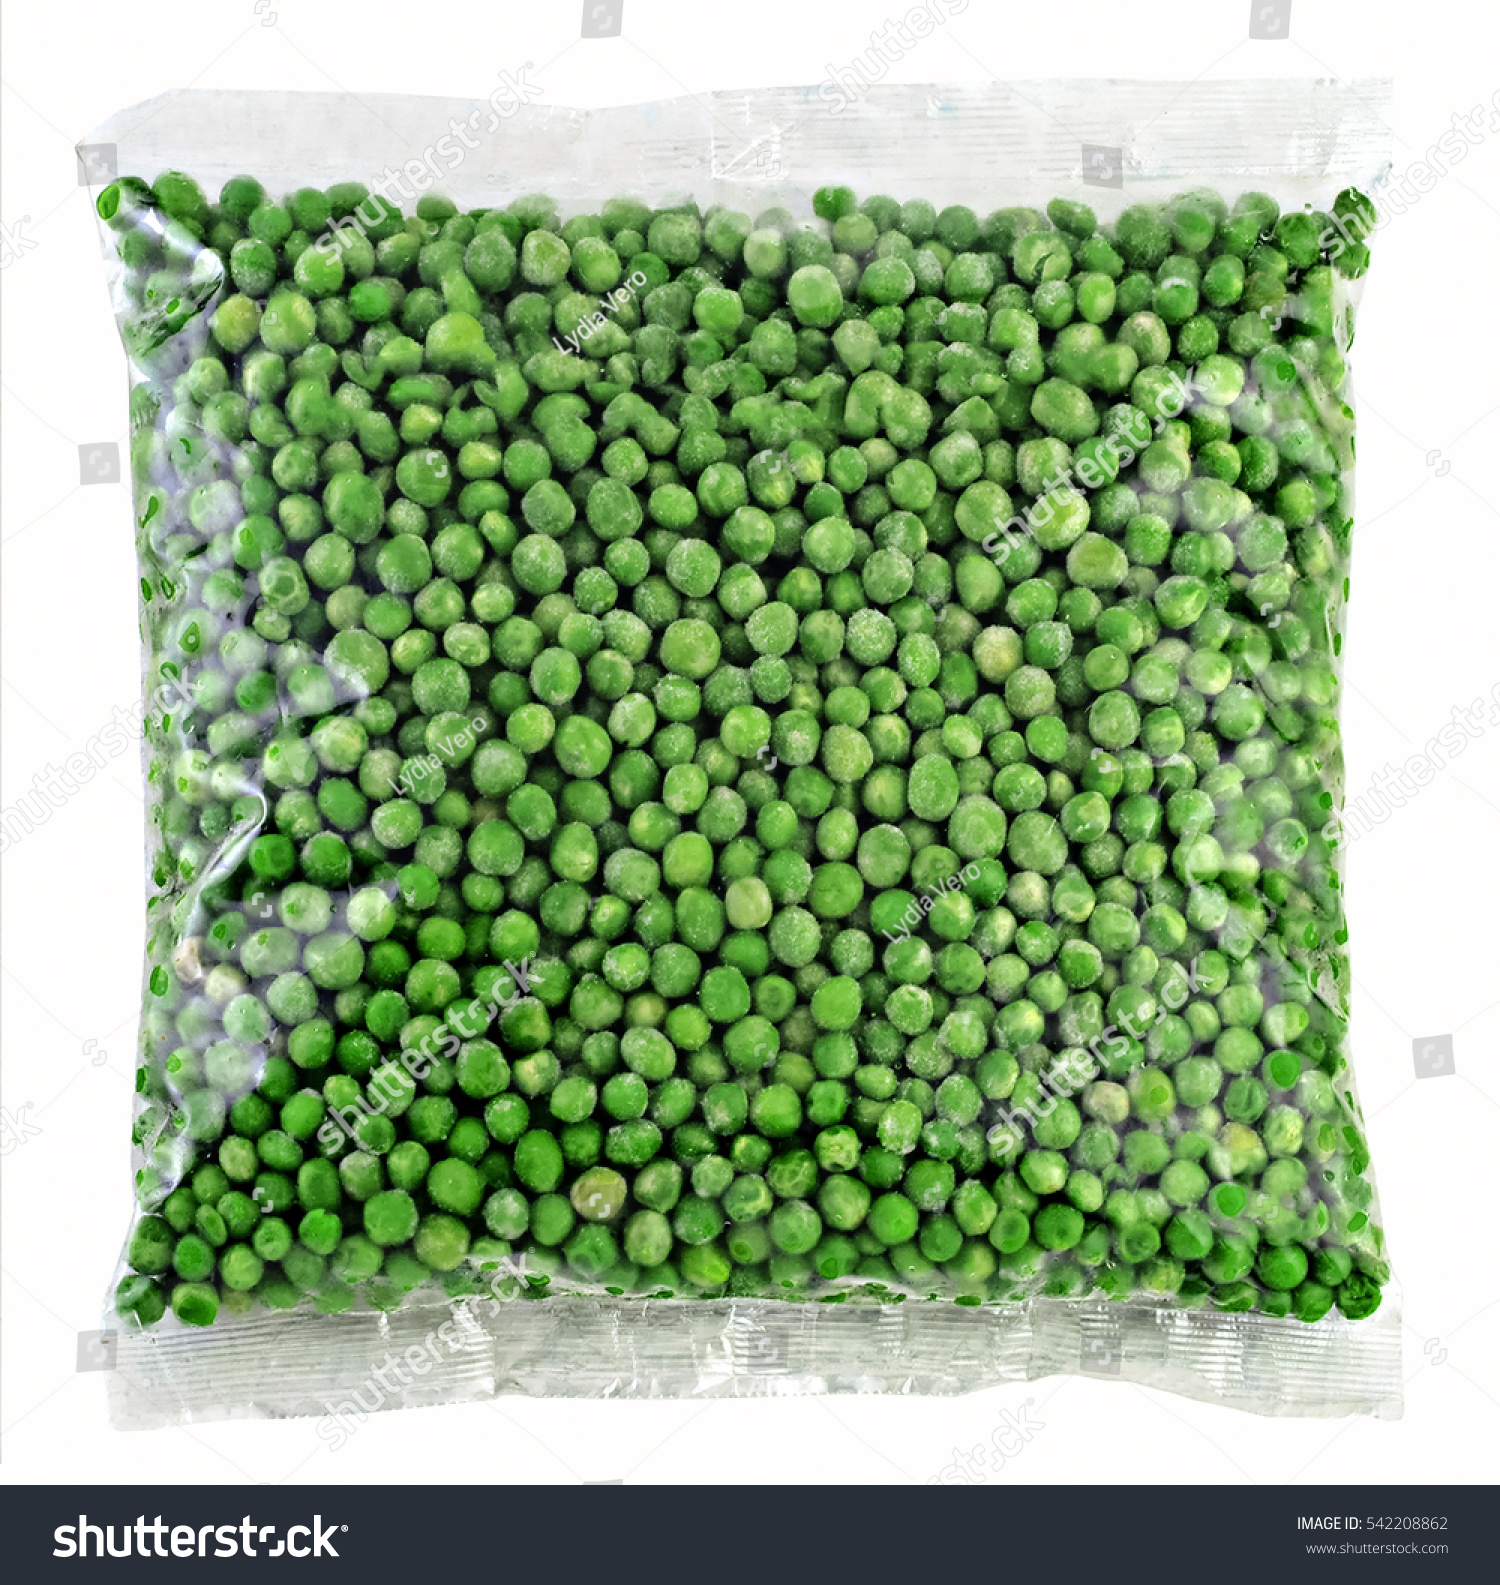 Download Frozen Green Peas Plastic Bag Clipping Stock Photo Edit Now 542208862 Yellowimages Mockups